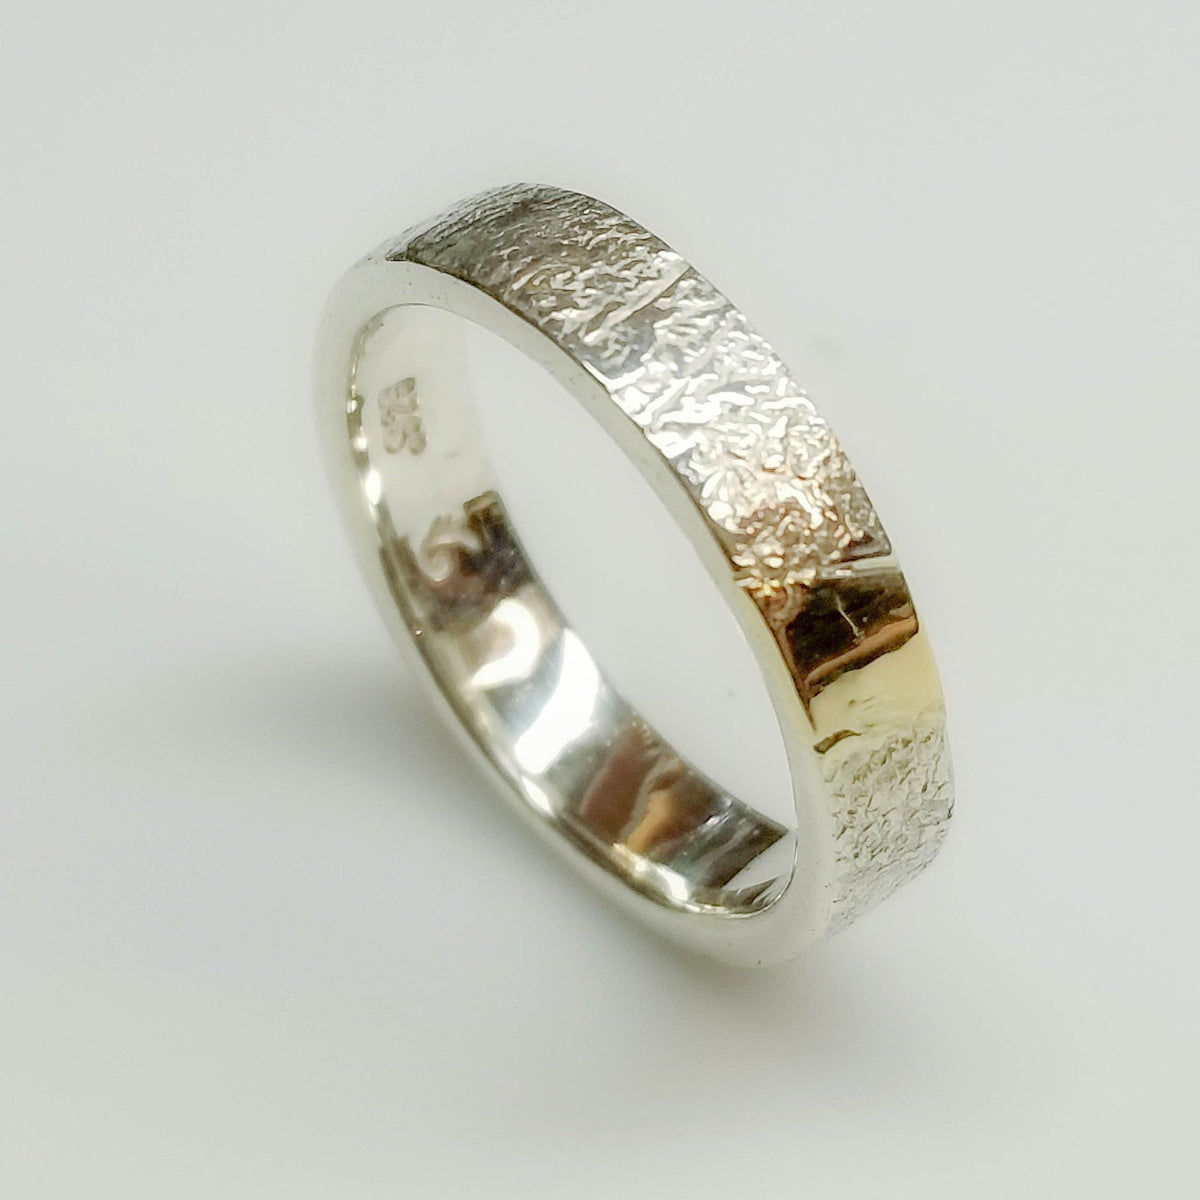 Textured silver with gold inlay band